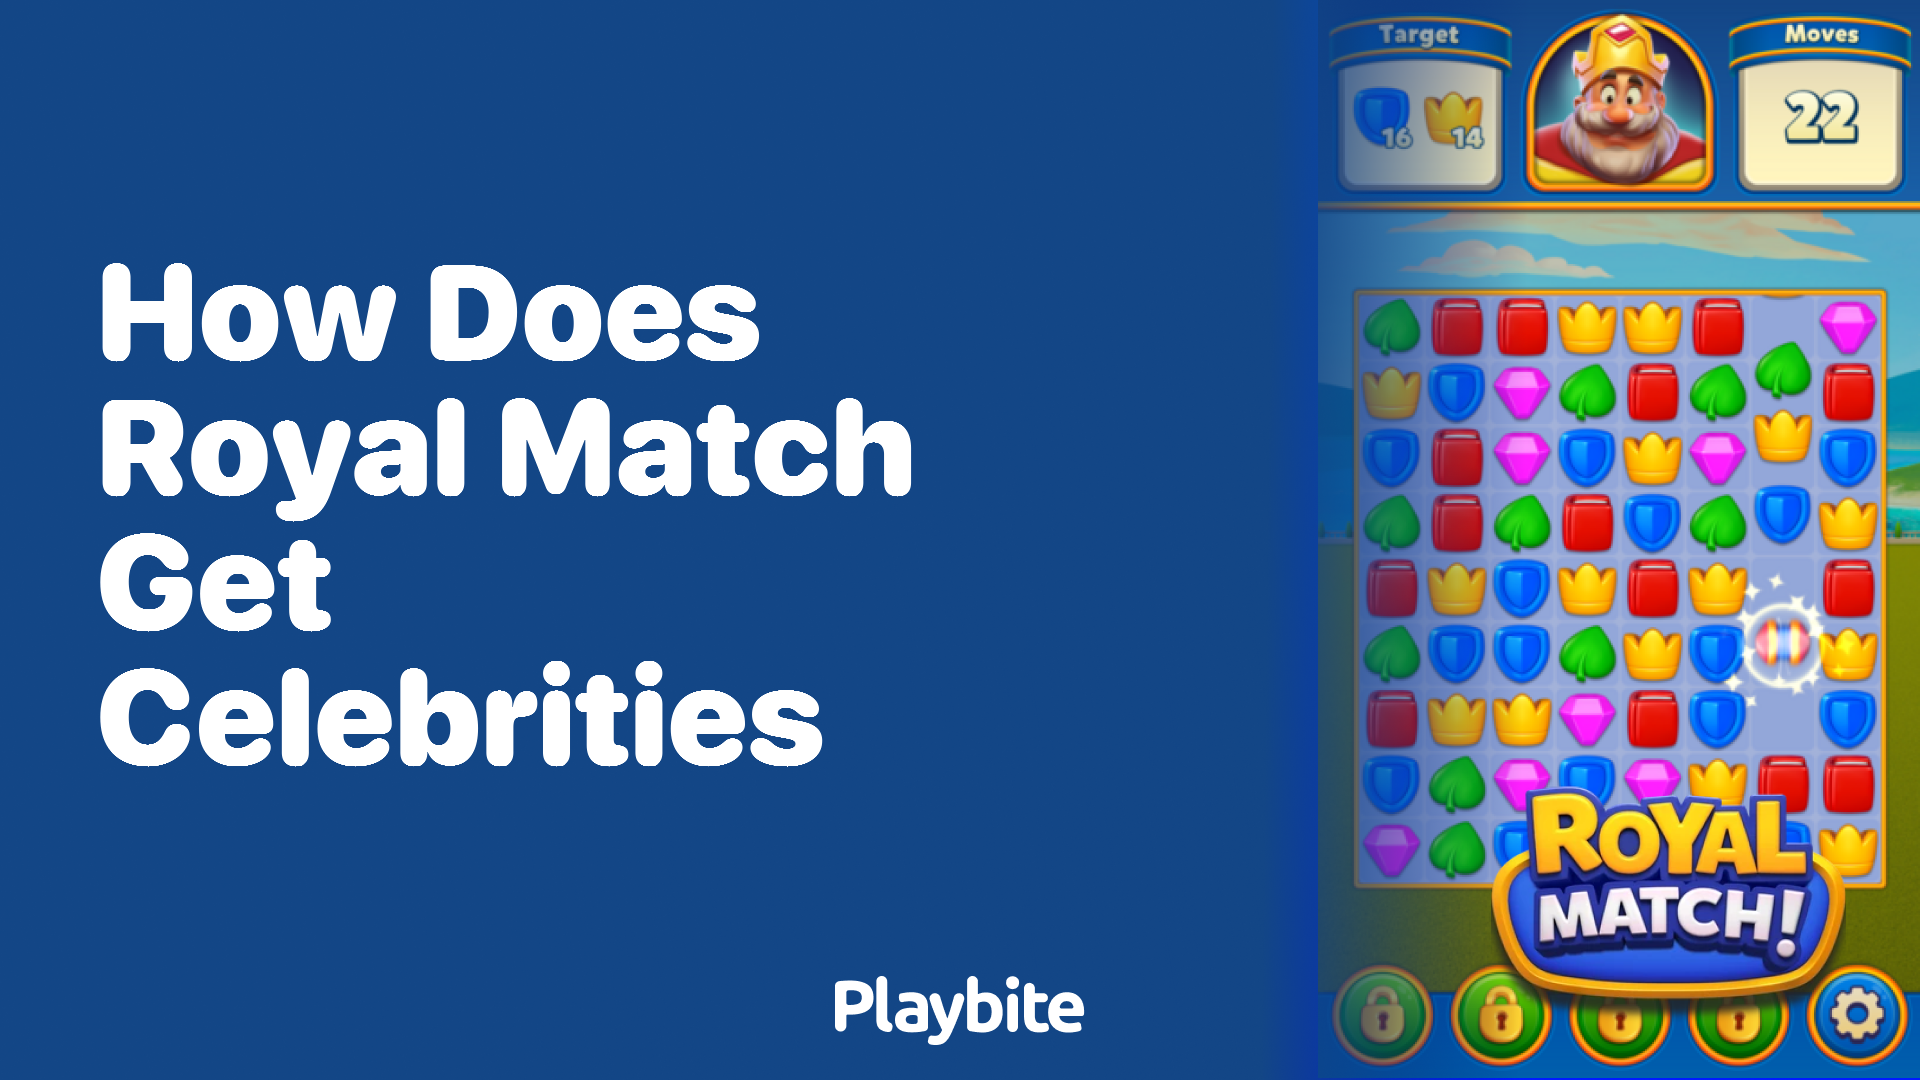 How Does Royal Match Get Celebrities?